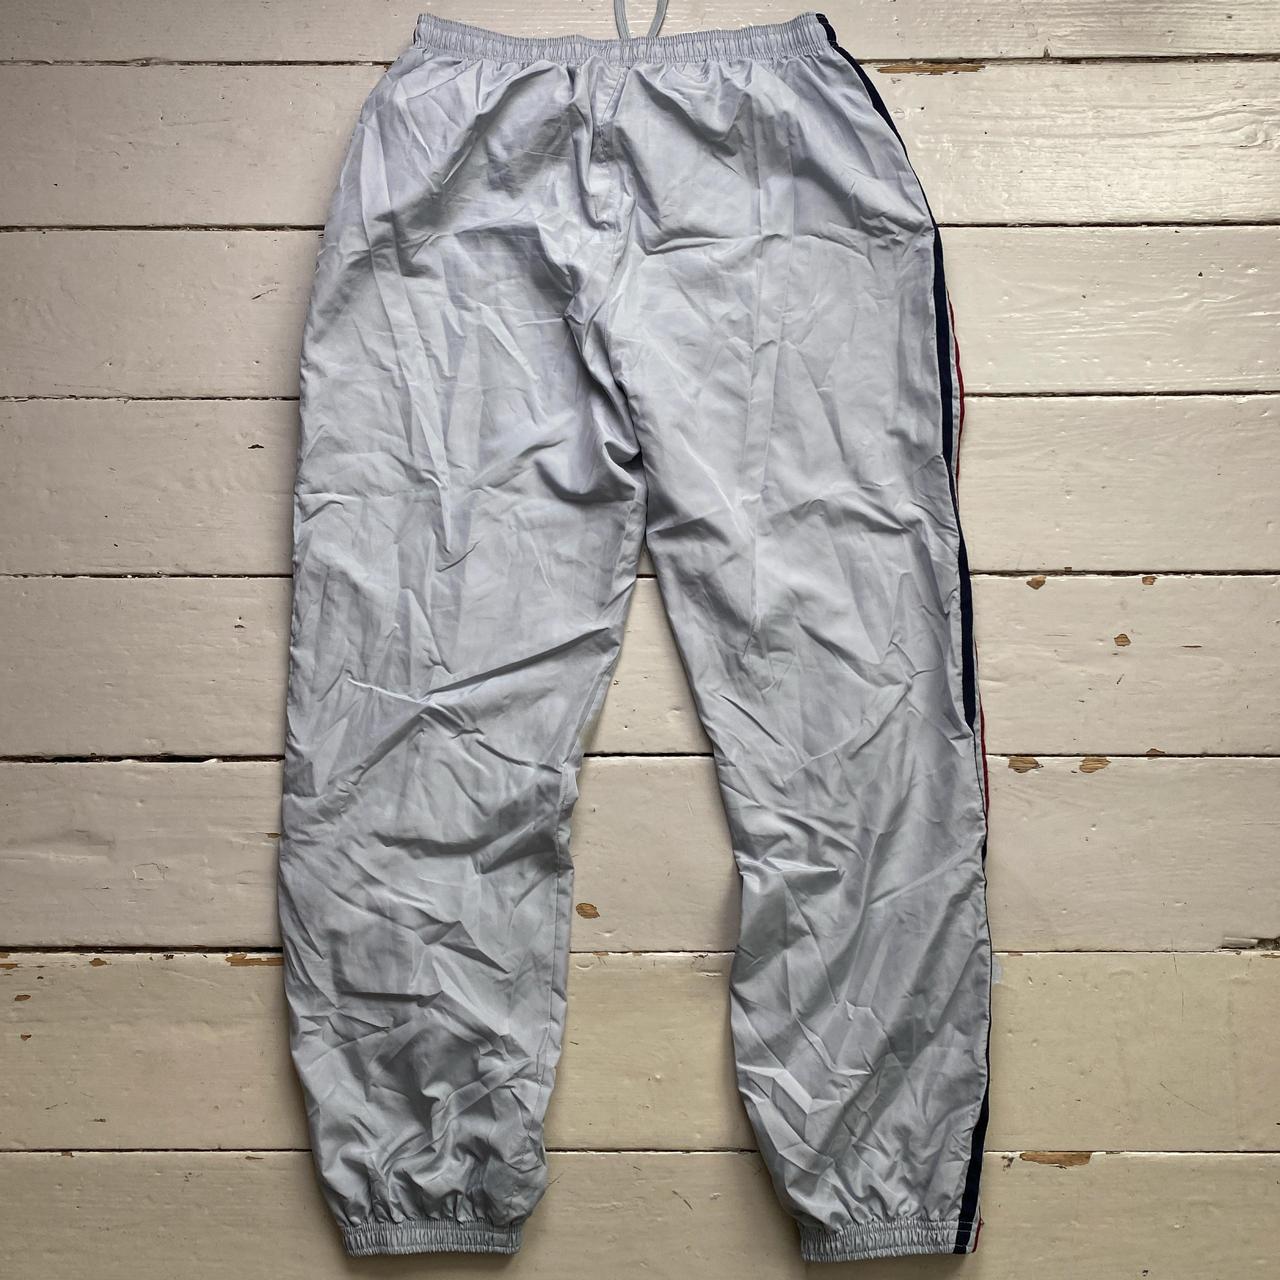 Reebok Silver Navy and Red Shell Trackpant Baggy Bottoms